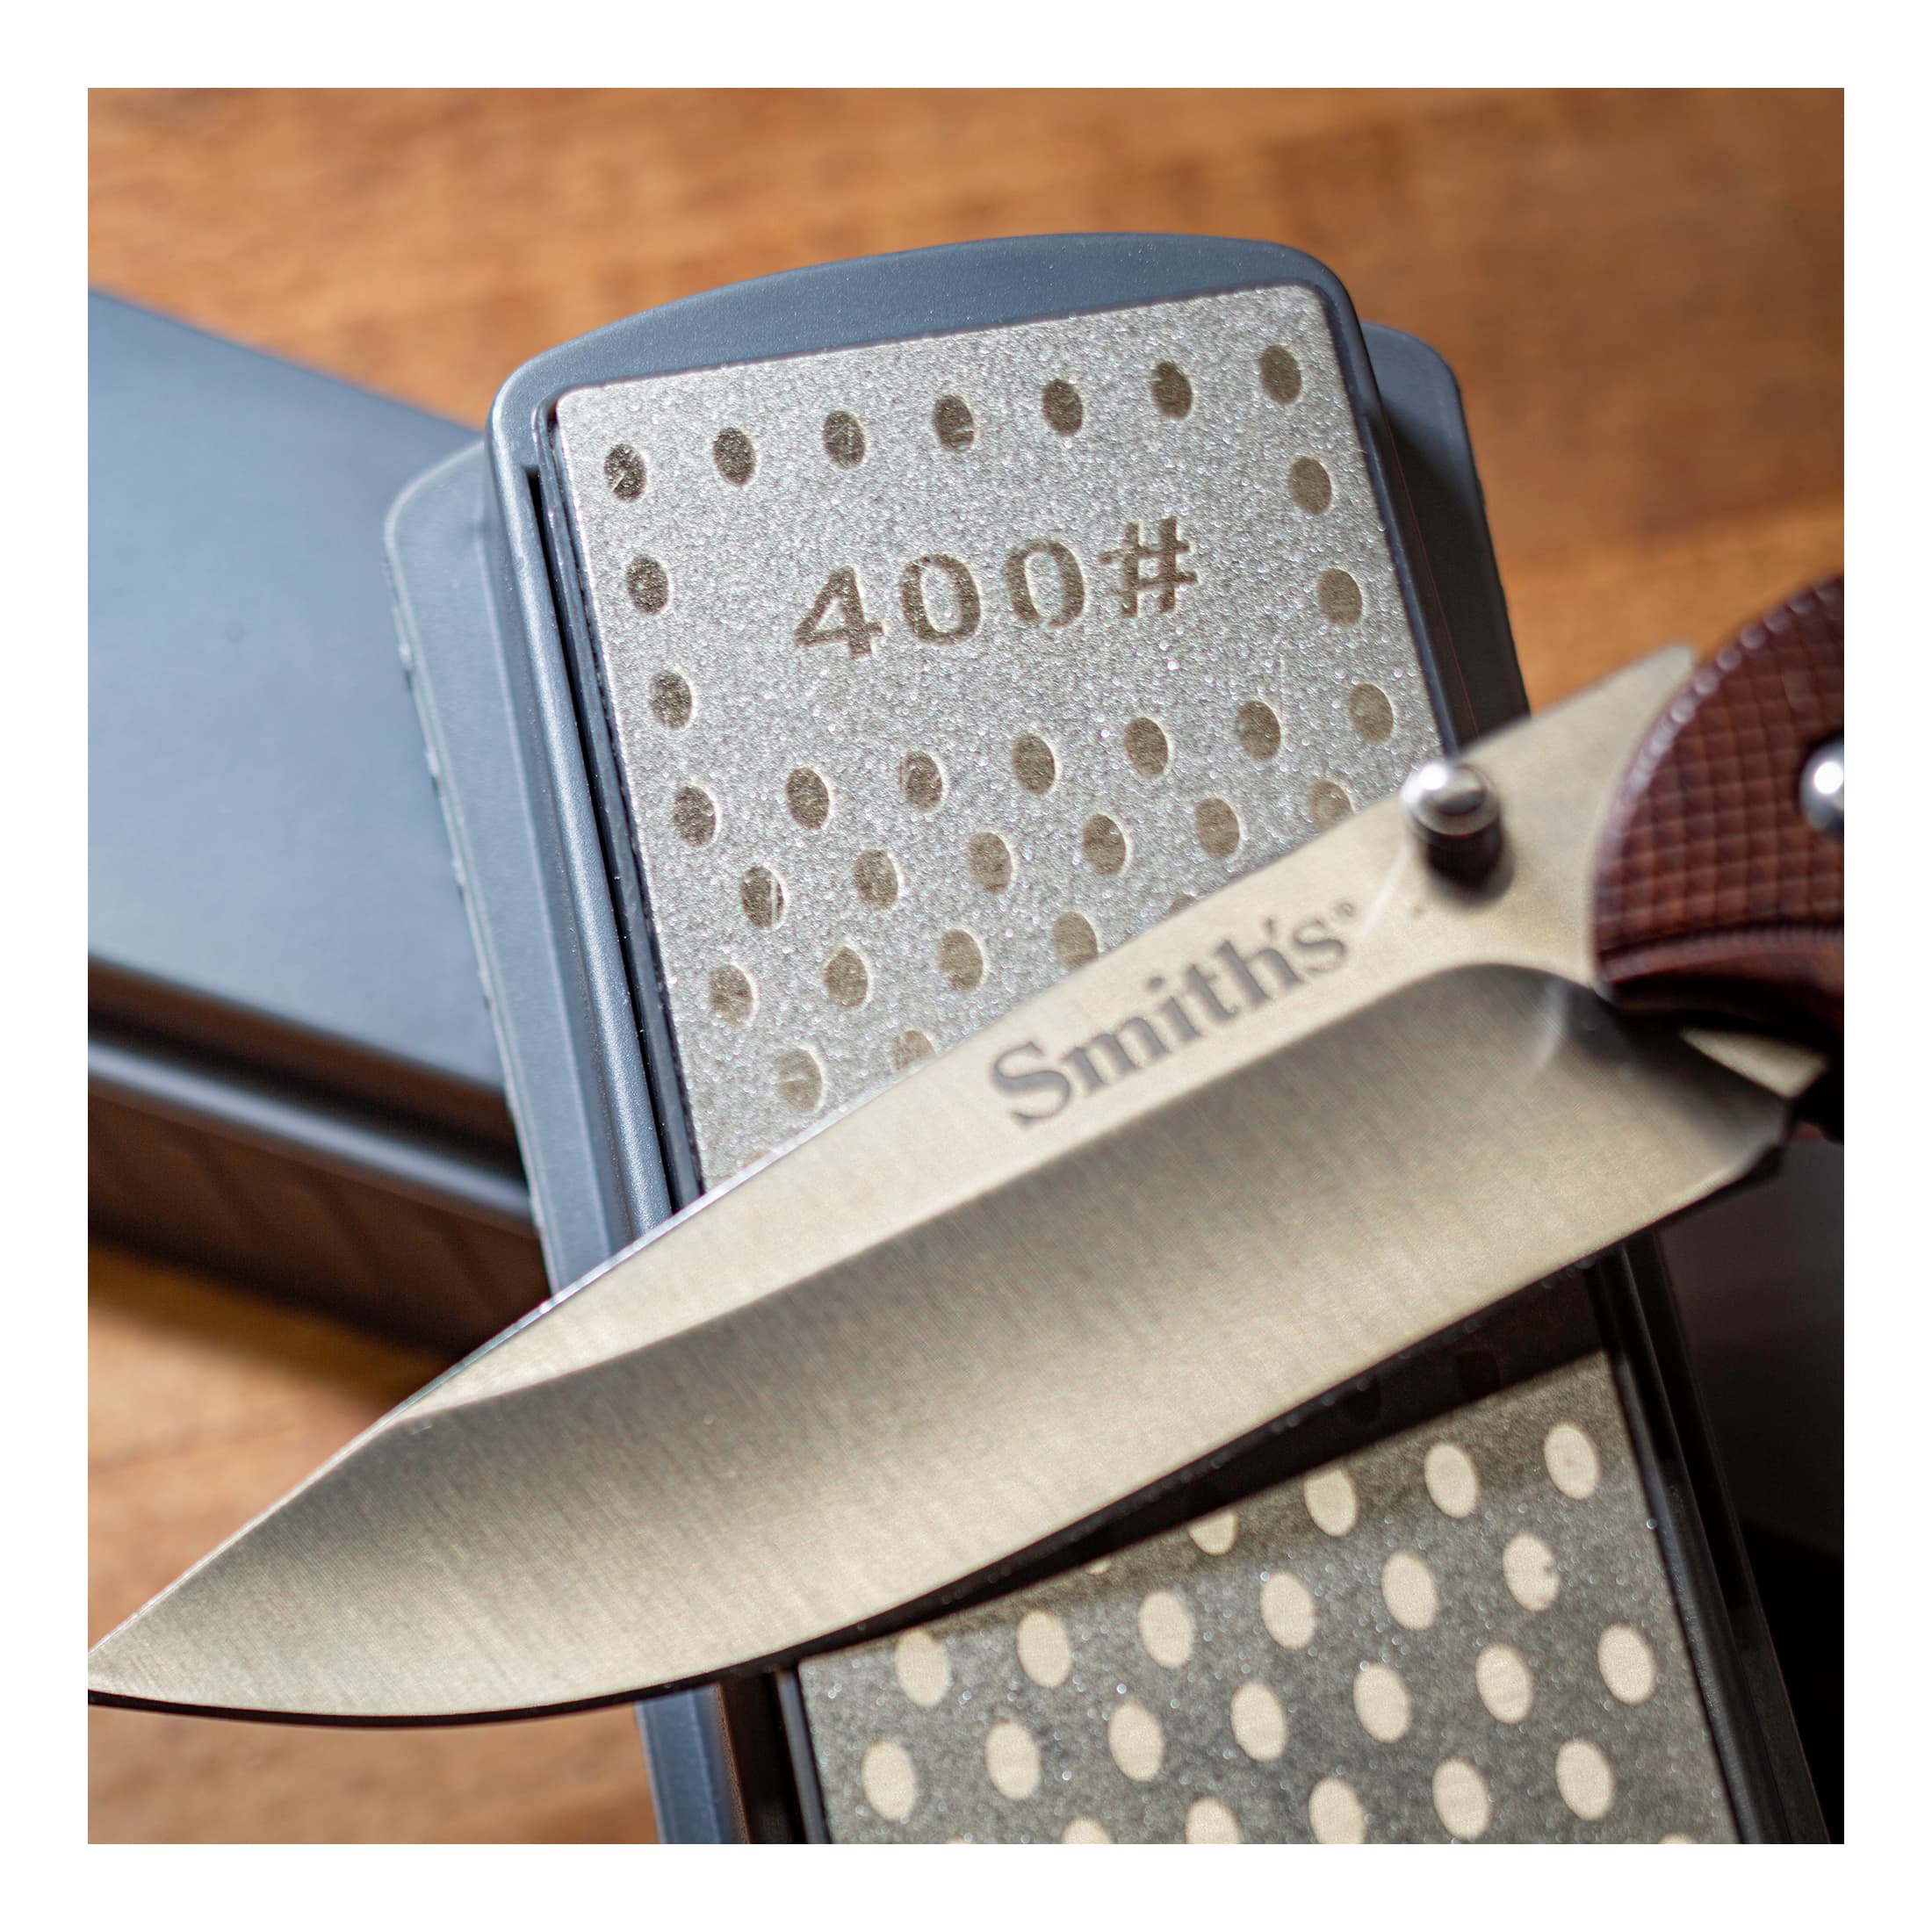 Smith's Consumer Products Store. 400 - 1000 DIAMOND STONE AND BASE